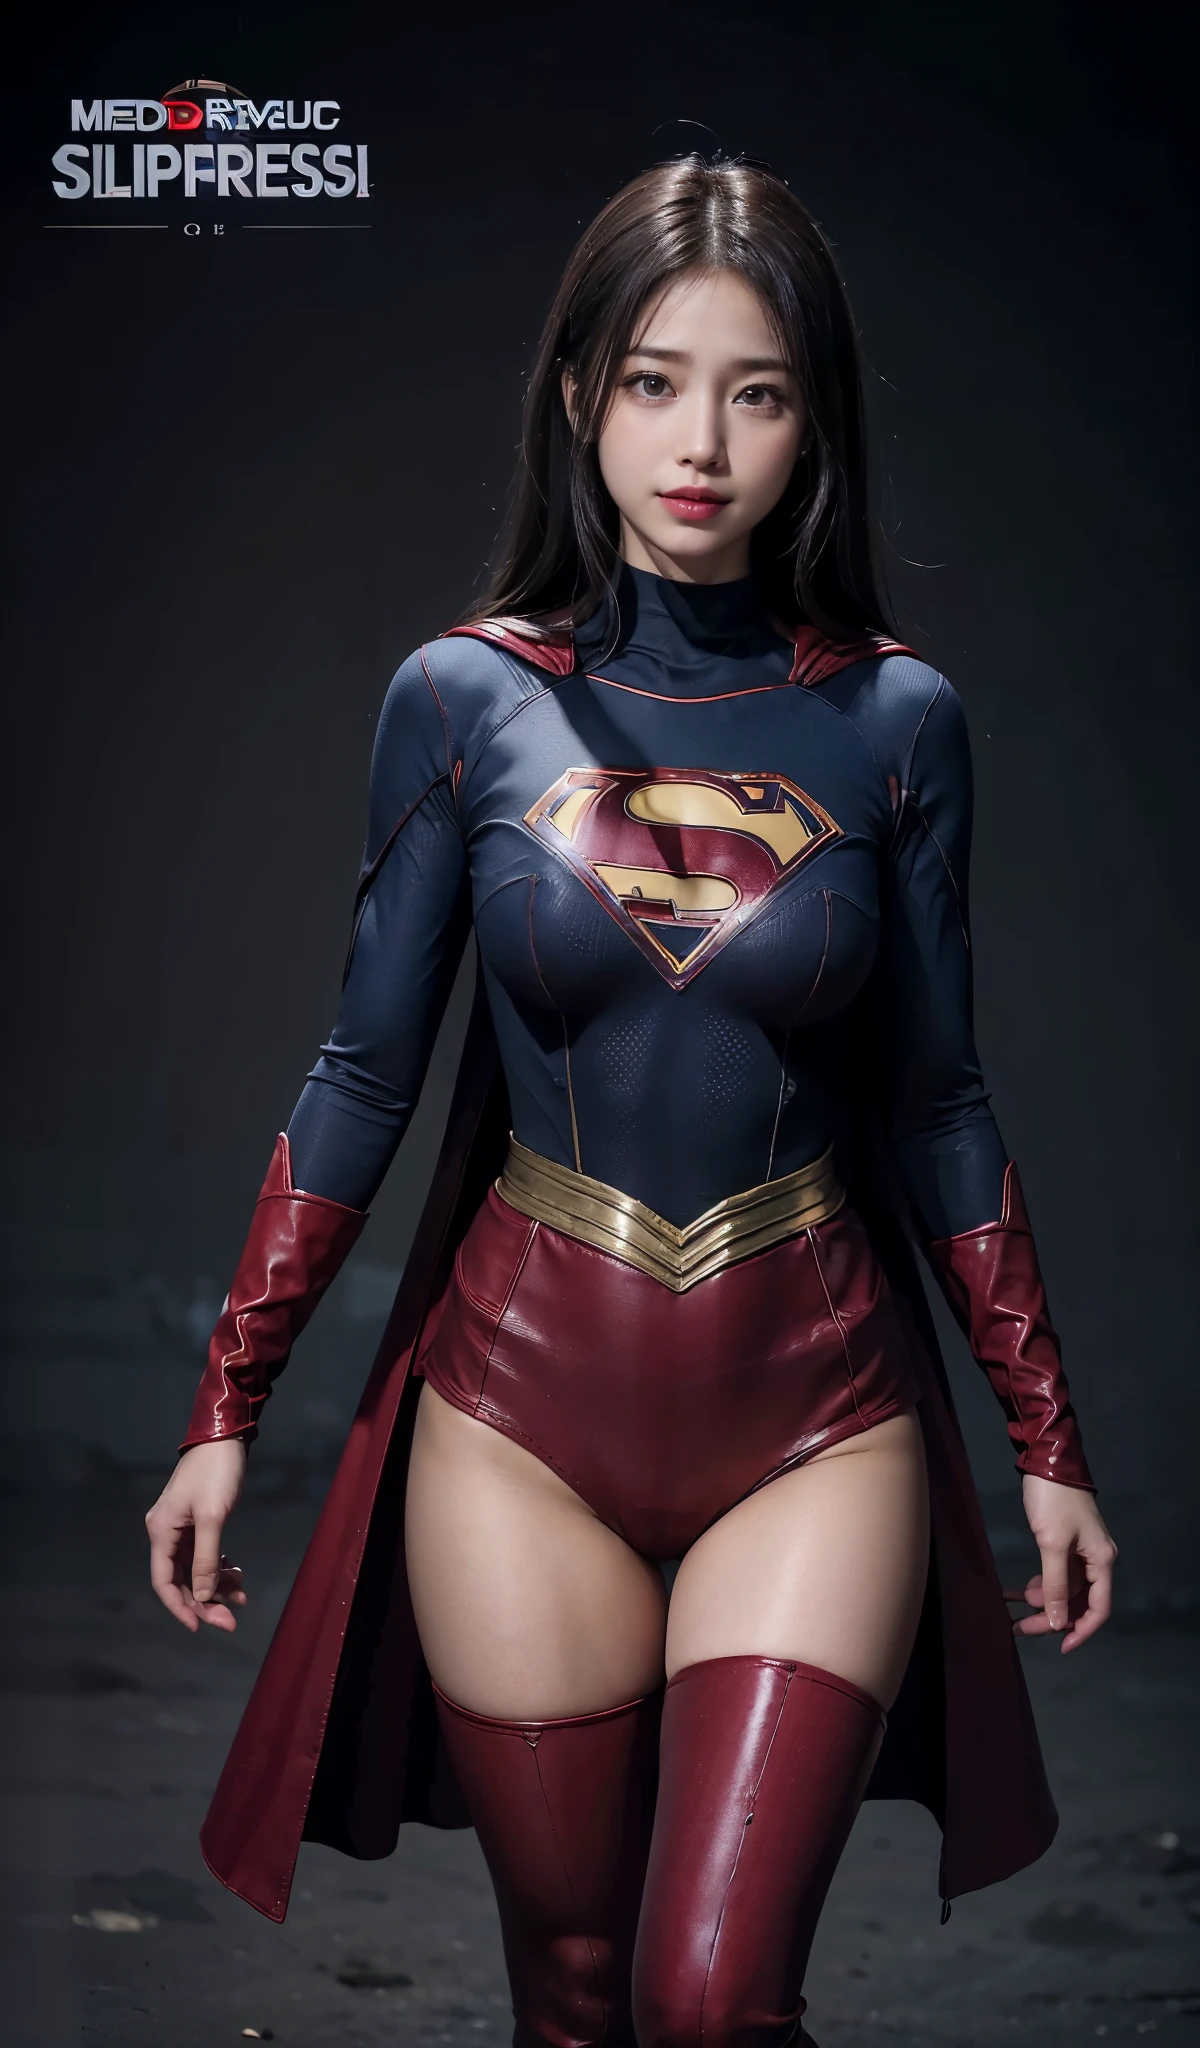 no background、no background、Fitted Supergirl costume、Hairstyle is short、Body Fit Costumes、draw the whole body、(((Wear black tights on your beautiful legs.)))、(((stretch your legs、tall、Legally express the beauty of your smile)))、((((Make the most of the original image)))、(((Supergirl Costume)))、(((beautiful hair)))、(((Suffering)))、(((Feet must necessarily be worn with black tights)))、(((You need to wear red boots)))、((Highest image quality、8K))、((highest quality、8K、masterpiece:1.3))、(((Keep Background )))、clear focus:1.2、beautiful woman with perfect figure:1.4、slender abs:1.2、wet body:1.5、Highly detailed face and skin texture、8K